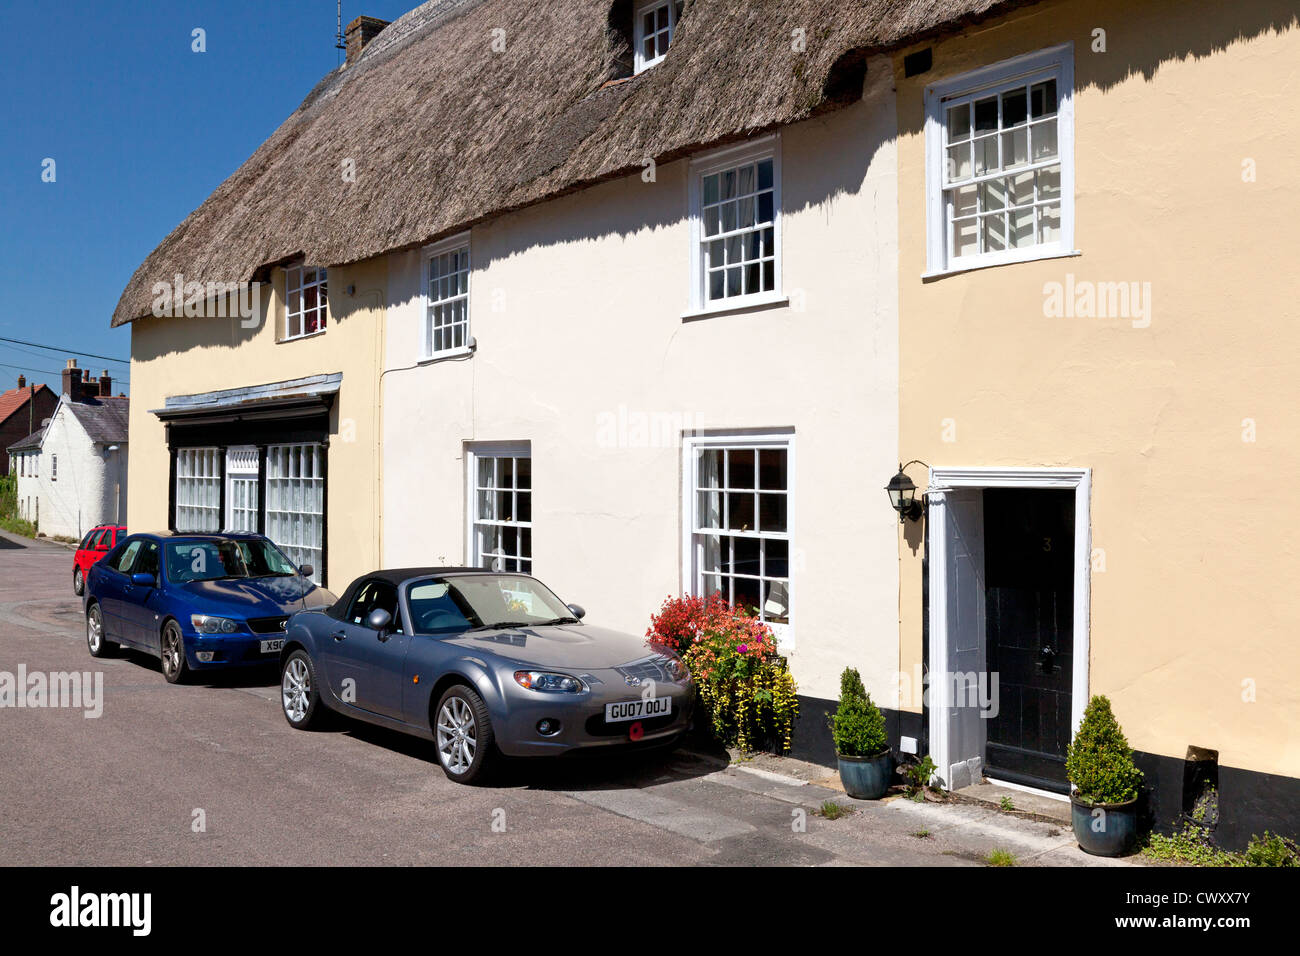 Thatched houses in The Square, Puddletown, Dorset Stock Photo